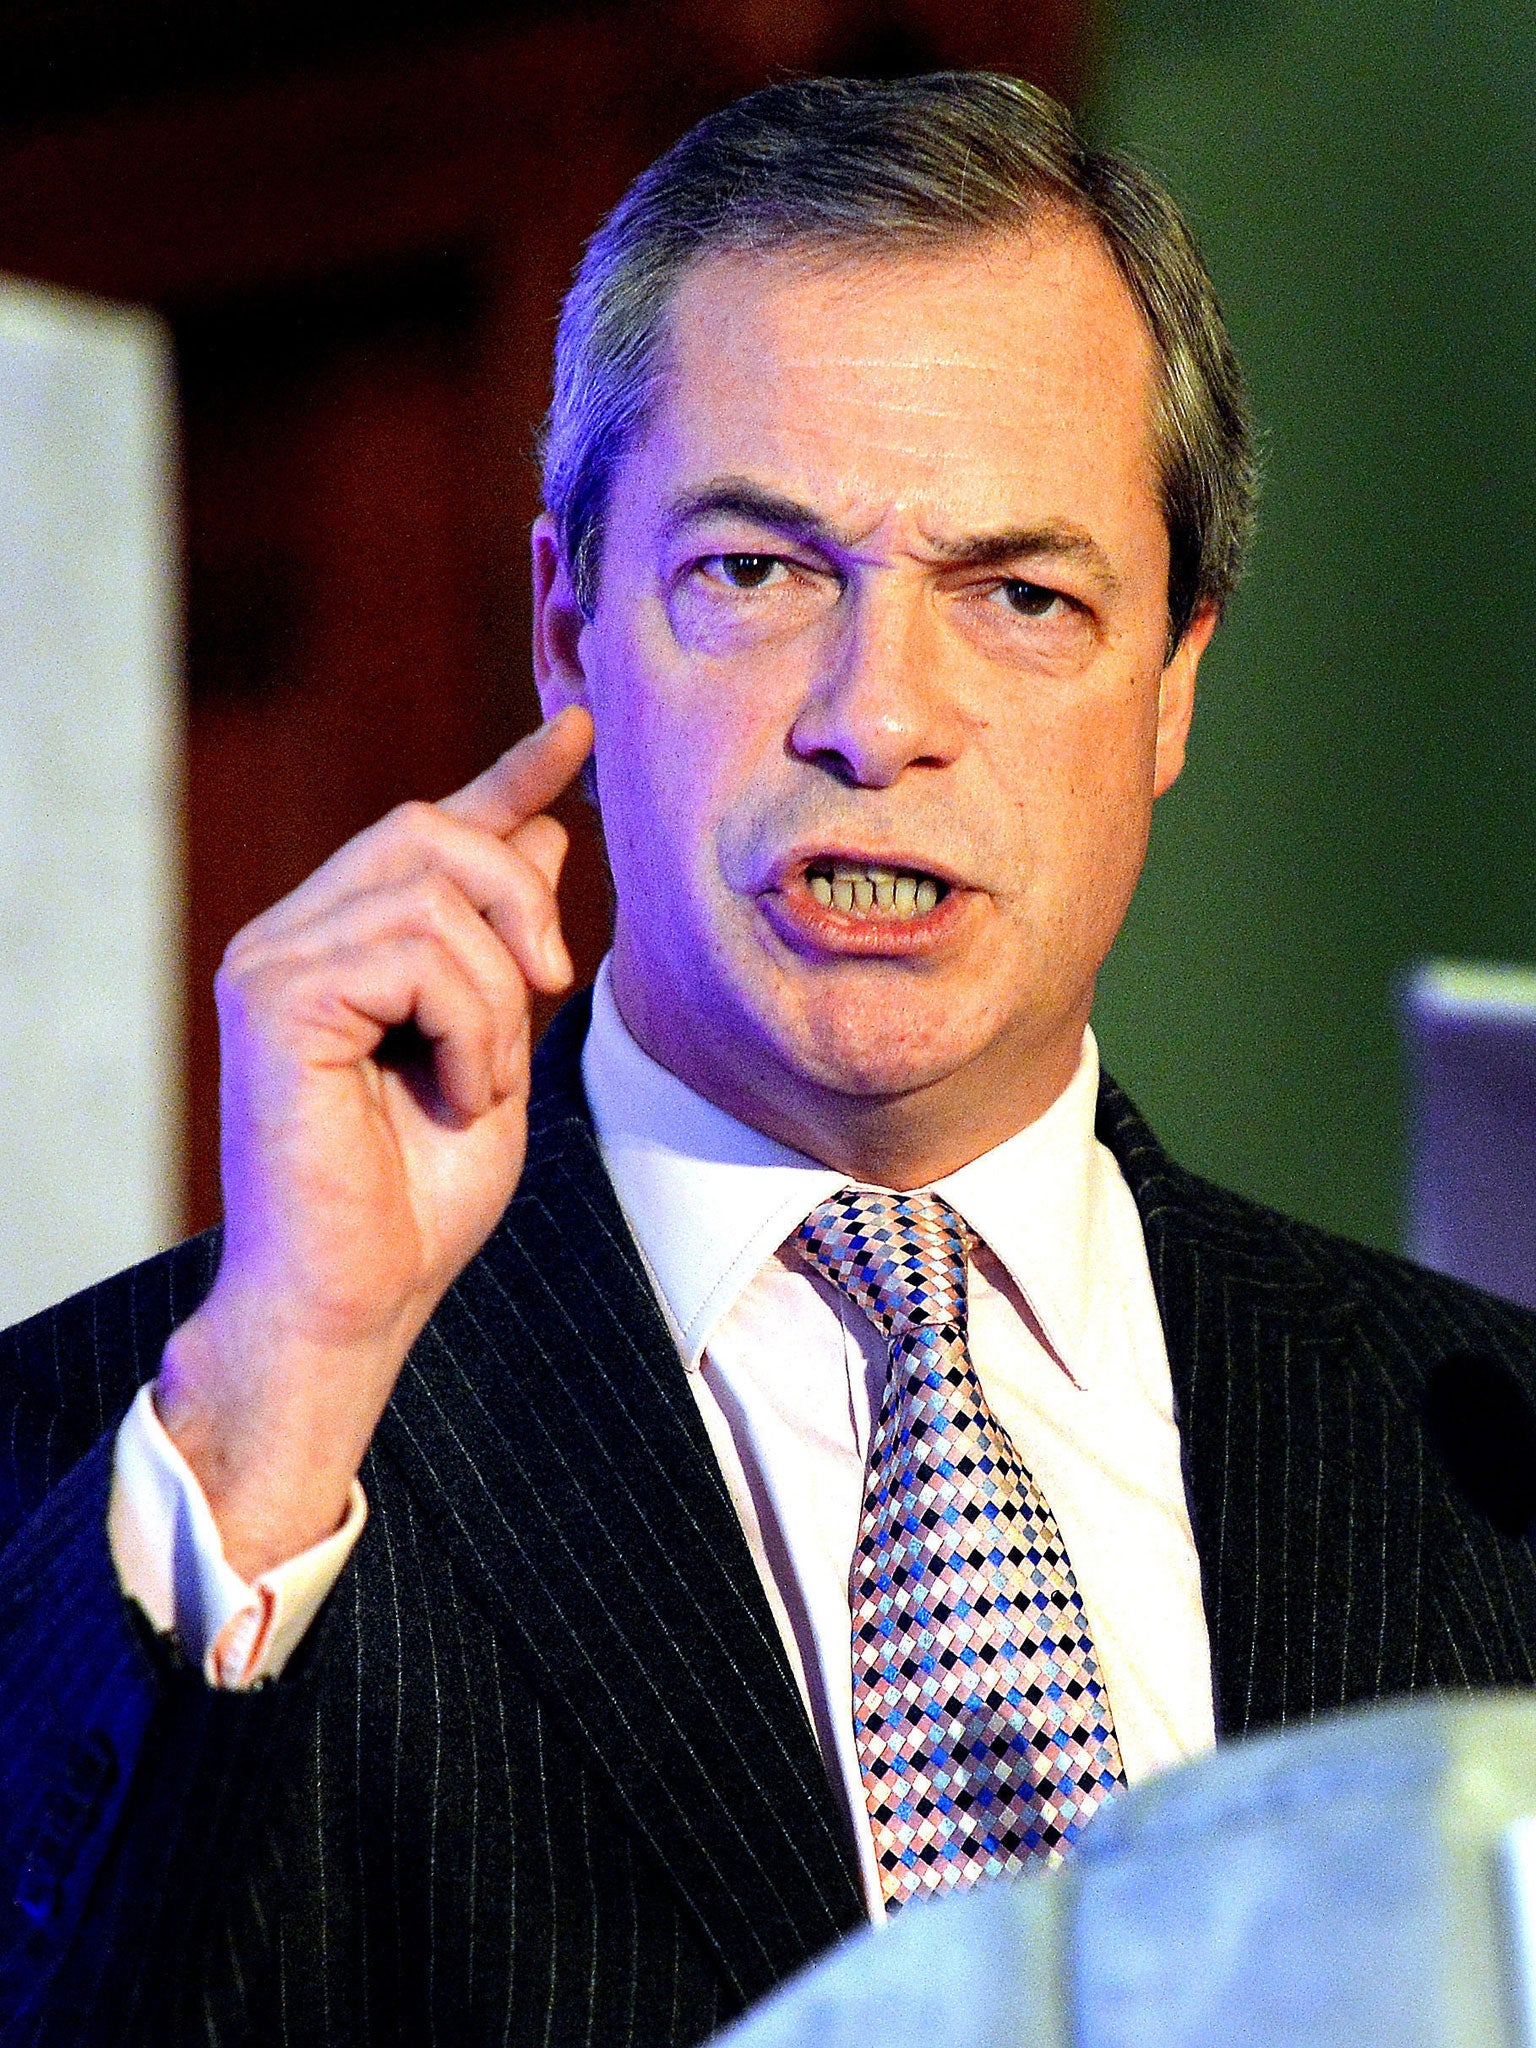 UK Independence Party (Ukip) leader Nigel Farage has named Vladimir Putin as the world leader he most admires, praising the Russian president's handling of the crisis in Syria